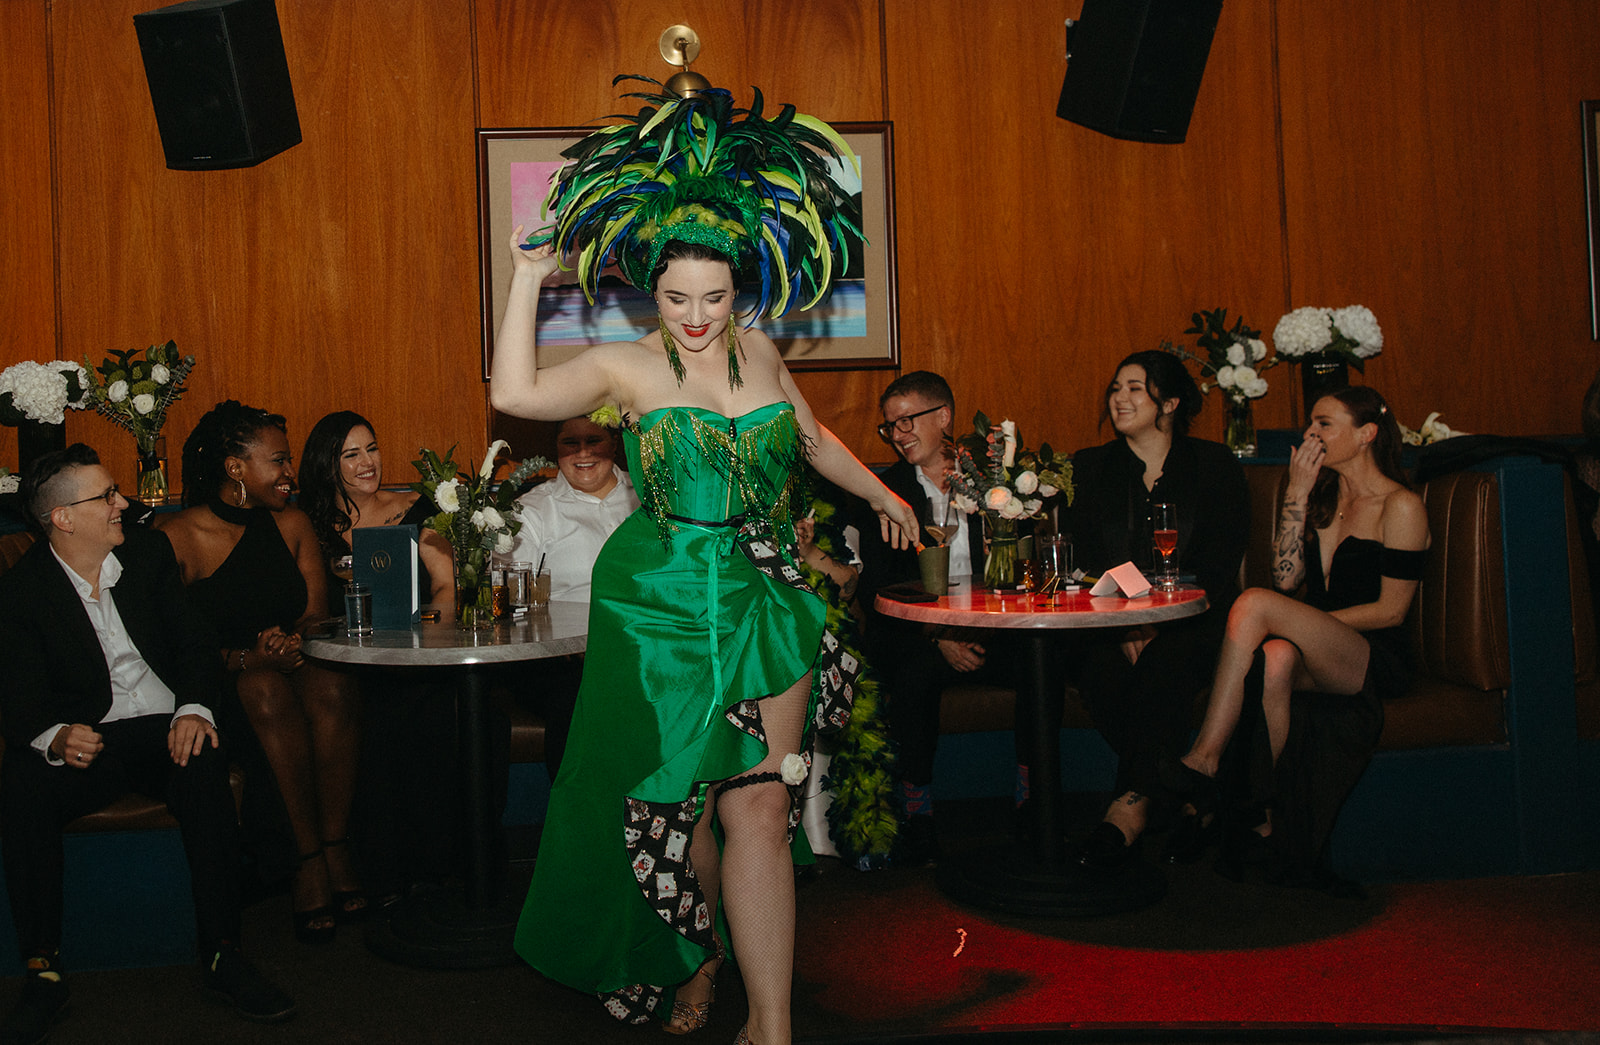 Burlesque dancer dancing for couple and their wedding party at Willis Show Bar